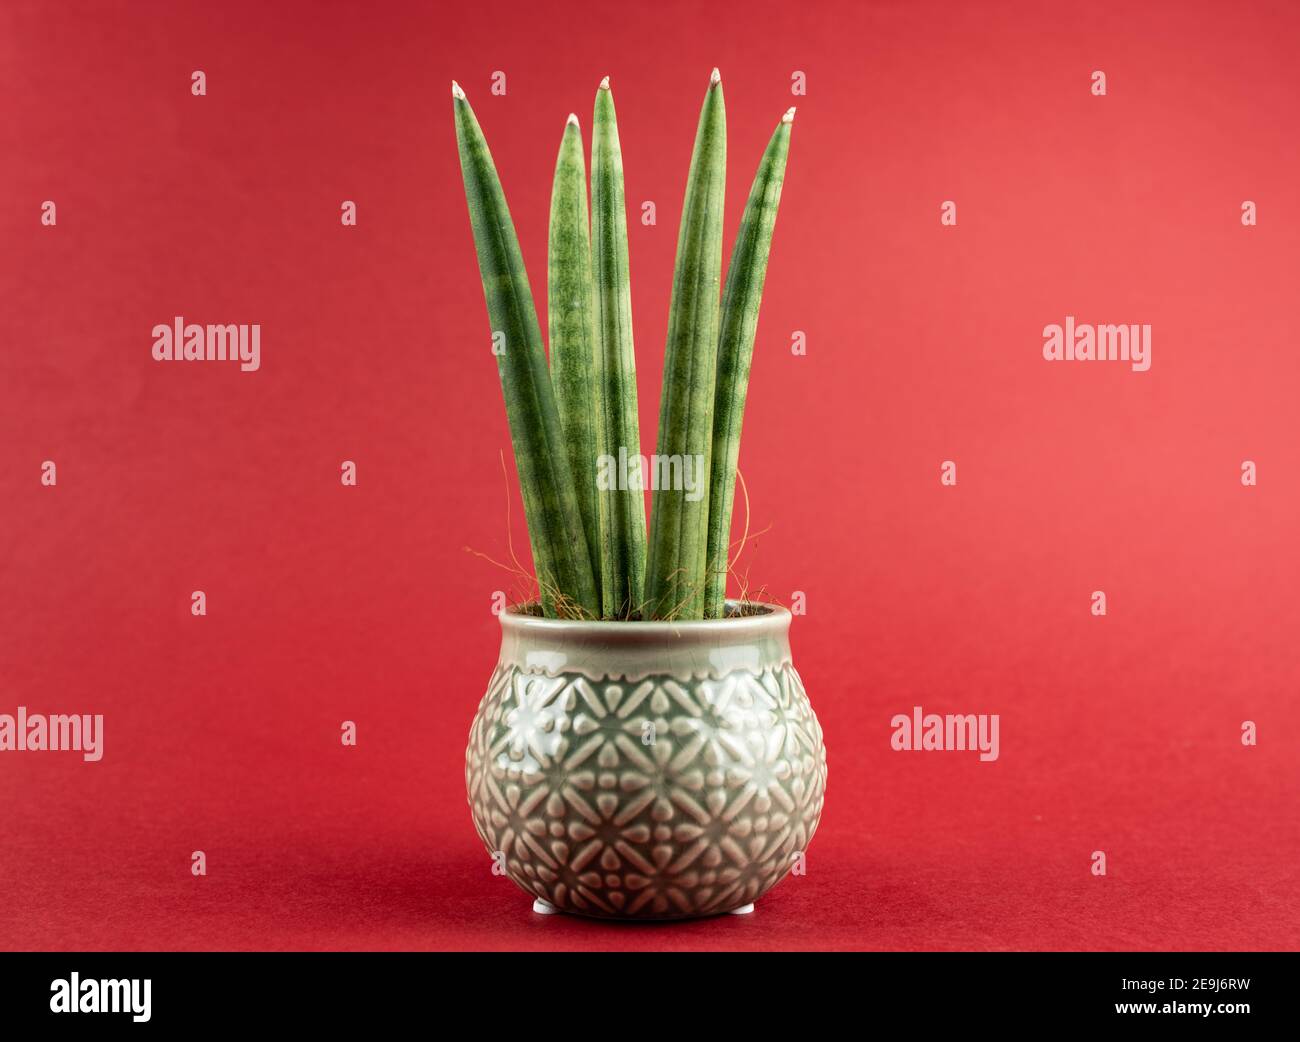 sansevieria cylindrica in pot with red background Stock Photo